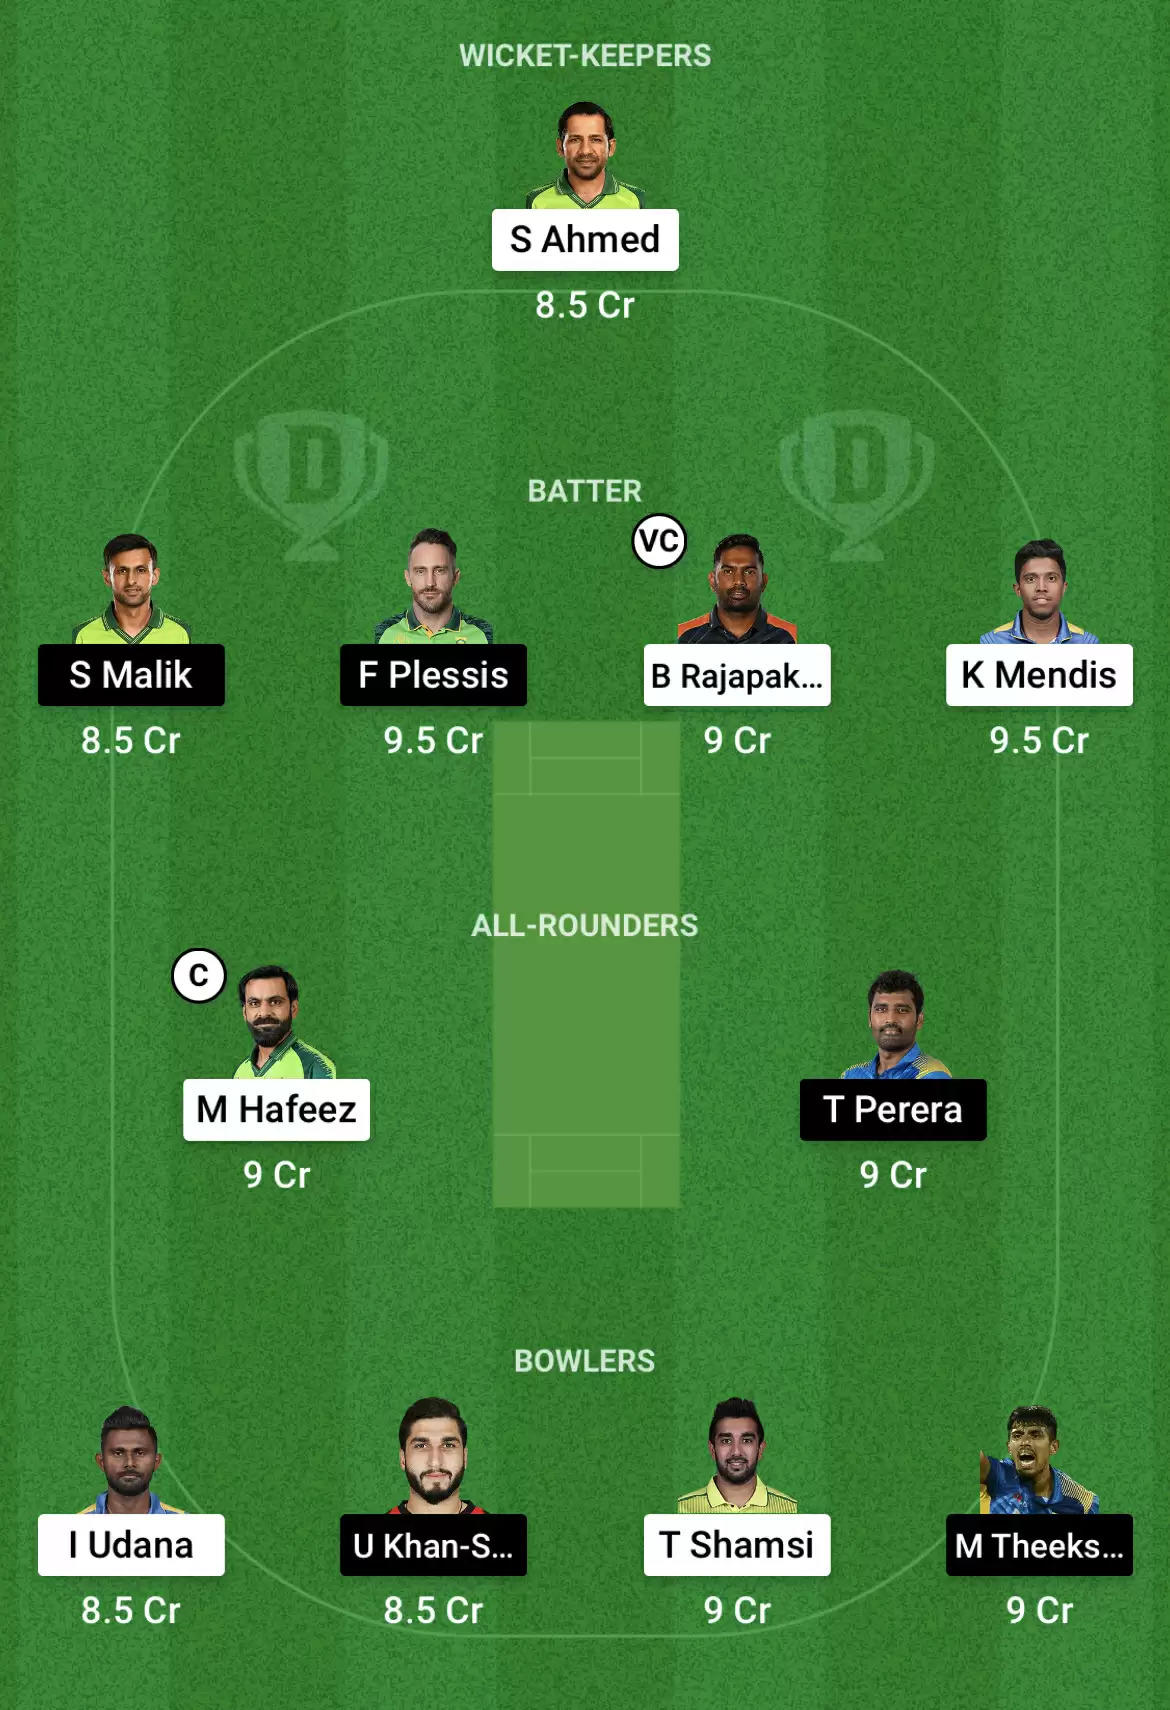 GG vs JK Dream11 Prediction for Lanka Premier League 2021: Playing XI, Fantasy Cricket Tips, Team, Weather Updates and Pitch Report